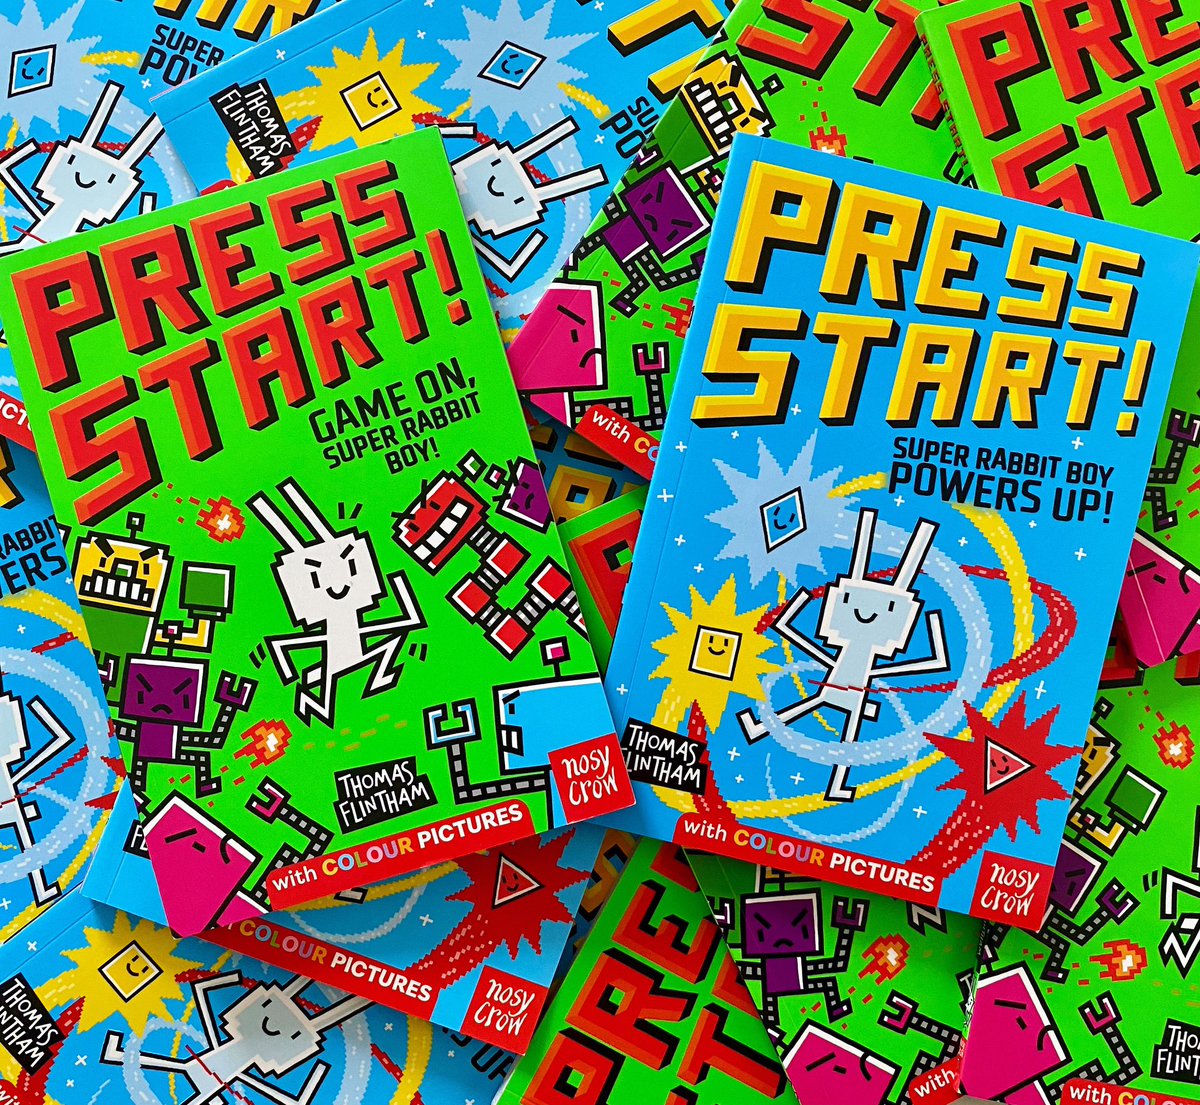 #SuperRabbitBoy has arrived in the UK! #pressstart Books 1&2 available today thanks to the lovely folks @NosyCrow 🐰🎮👦🏾